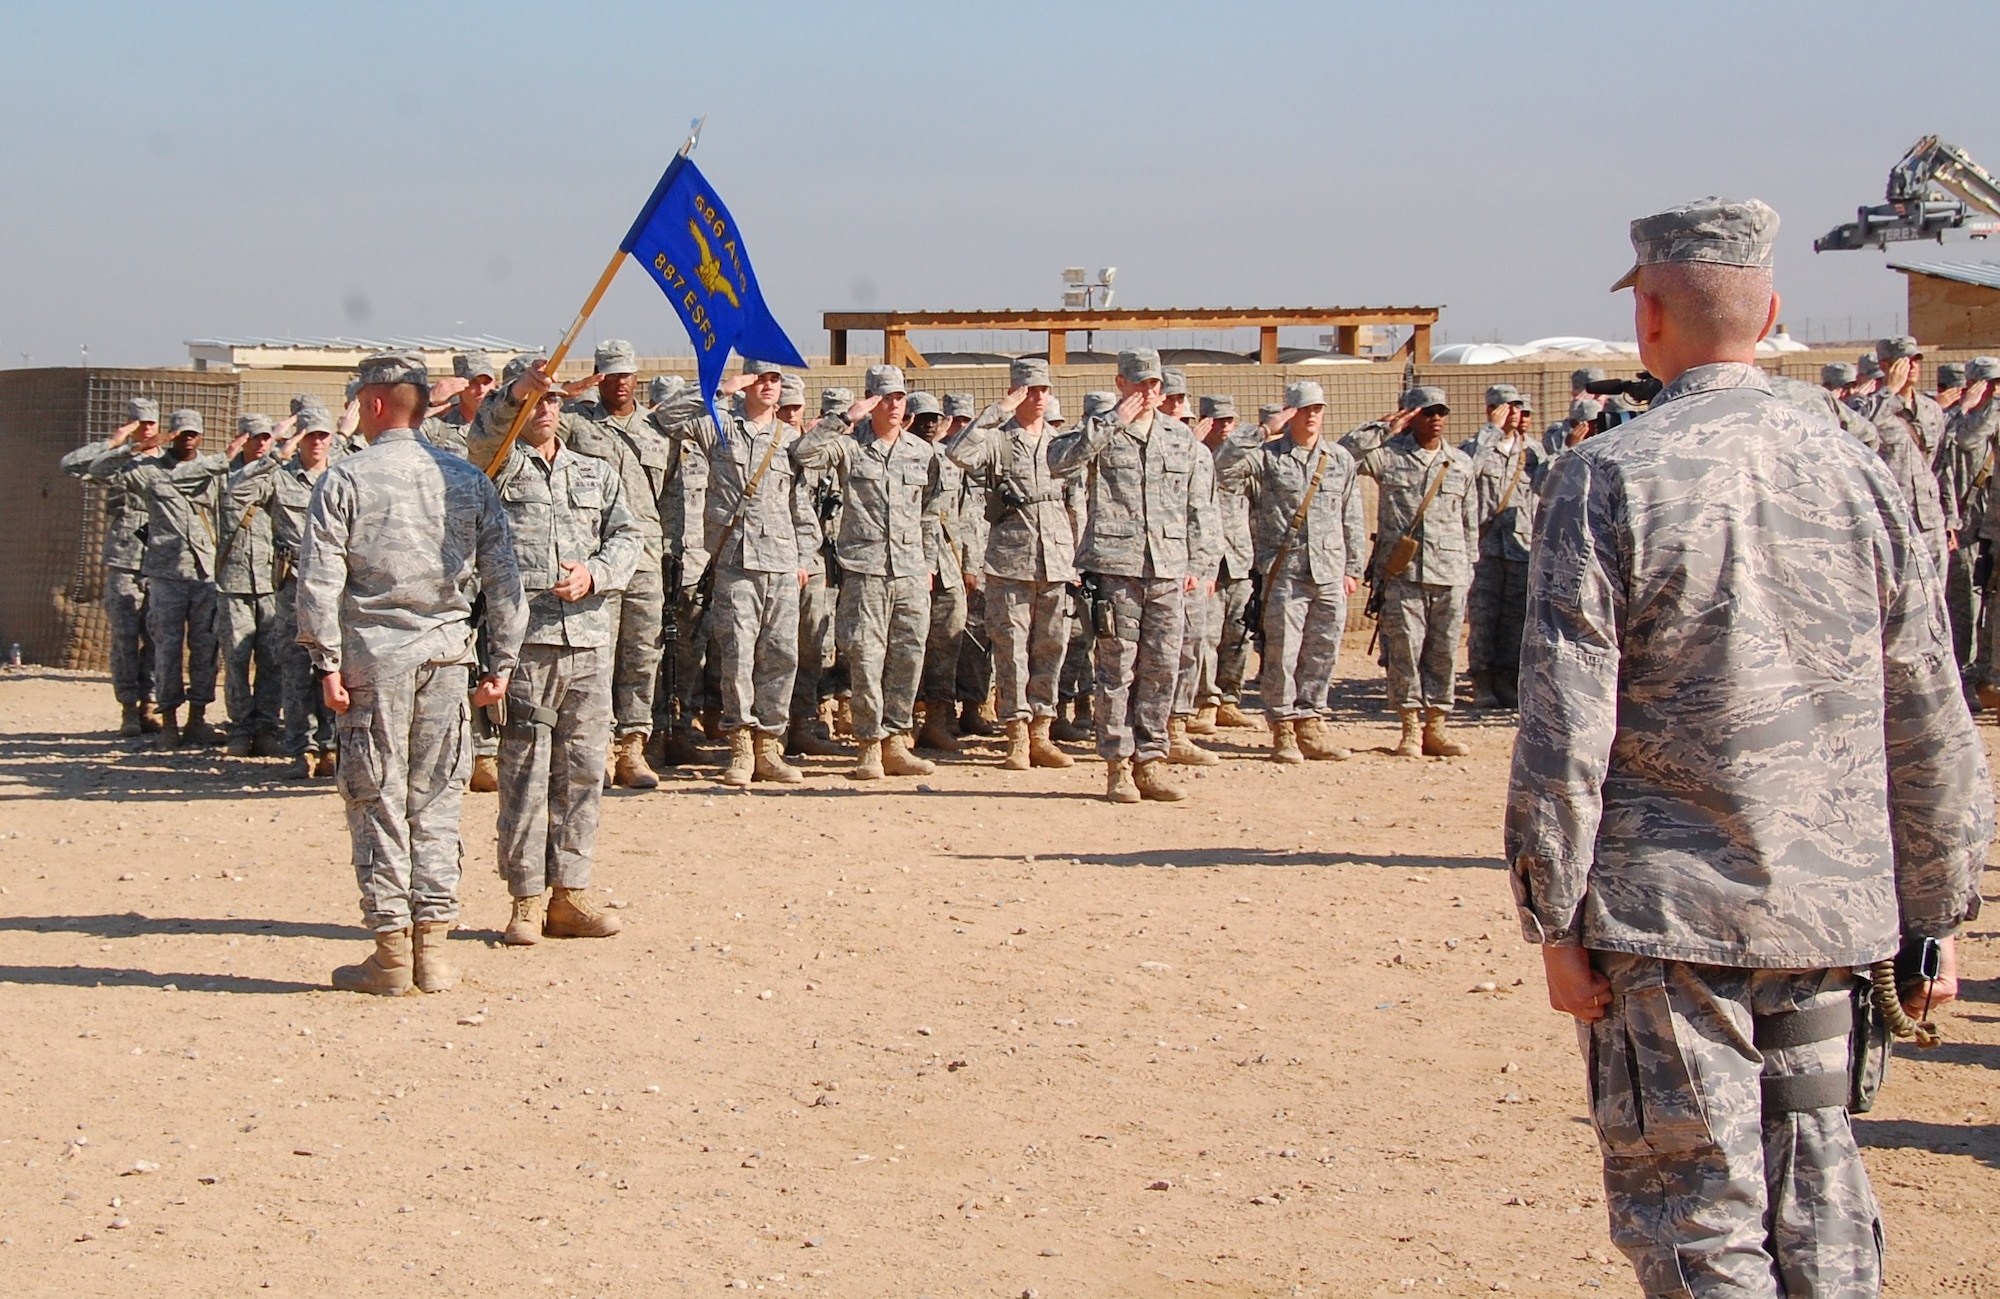 CAMP BUCCA, Iraq -- Members of the 887th Expeditionary Security Forces Squadron render their final salute to Maj. Larry Wood, 887th ESFS commander during the 887th ESFS Deactivation Ceremony Dec. 3. (U.S. Air Force photo/Staff Sgt. Shaun Emery)